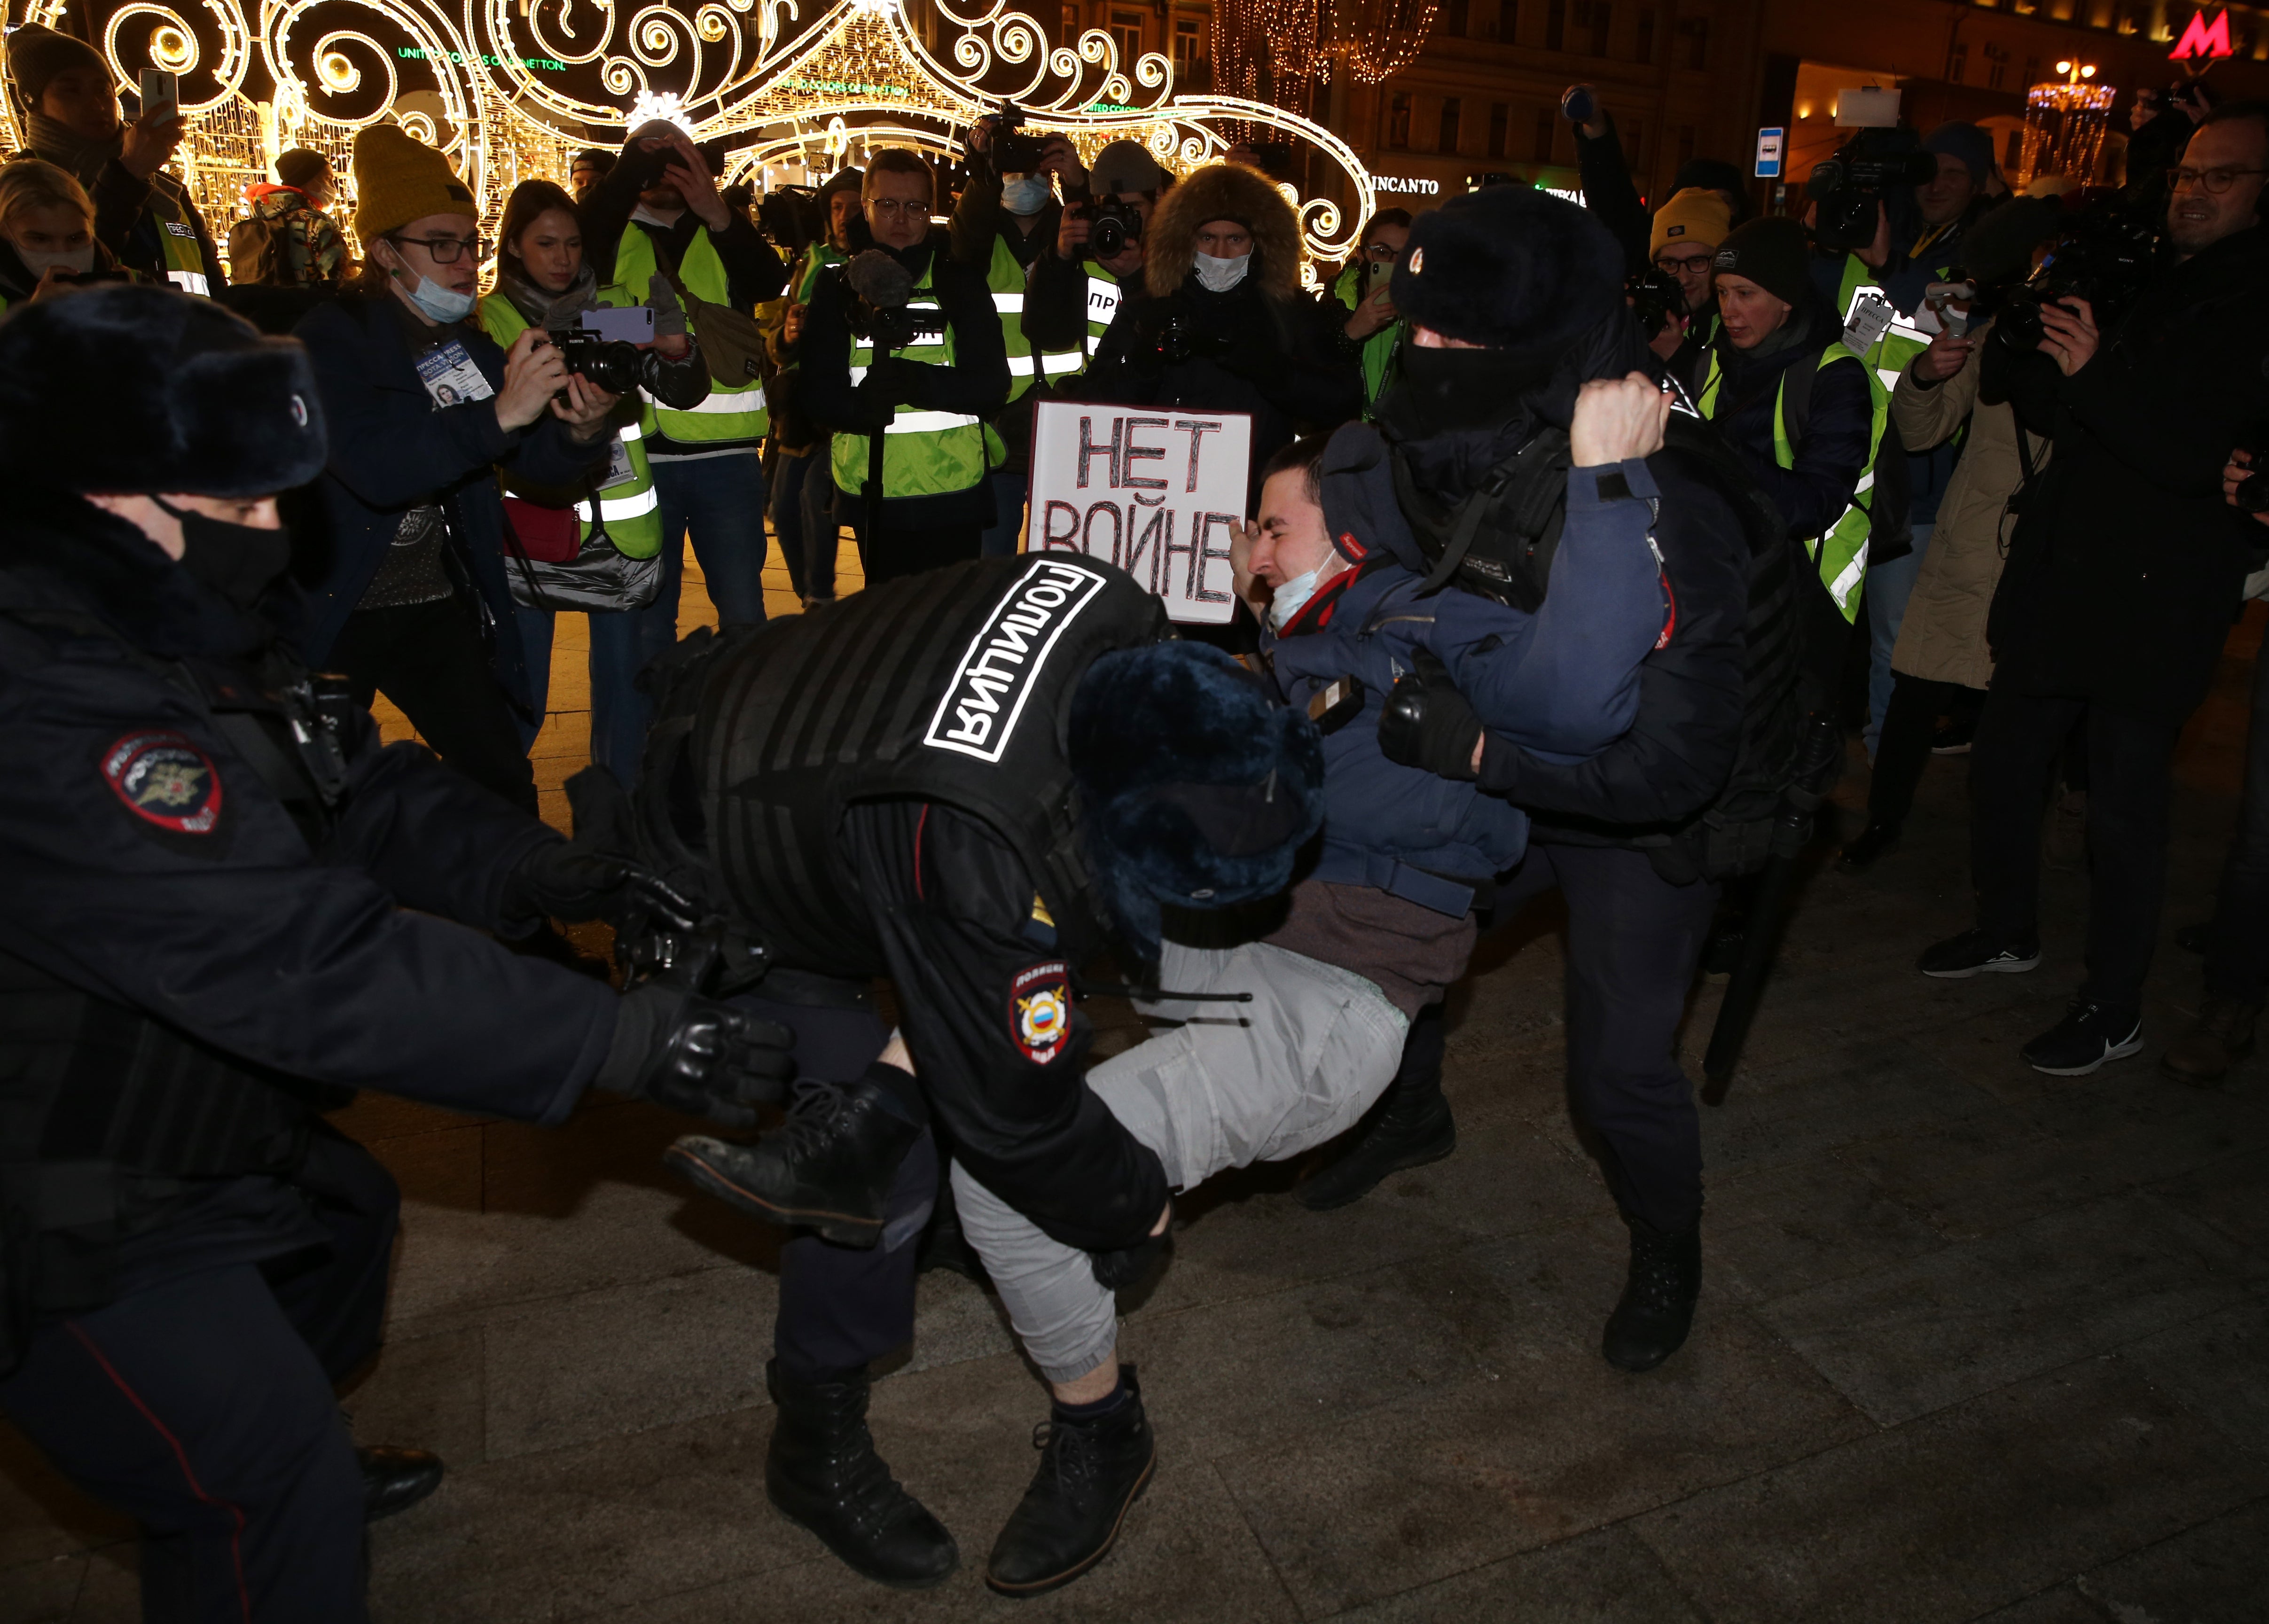 Police officers detain a man holding a placard reading “No war” during a protest at Pushkinskaya Square, in Moscow